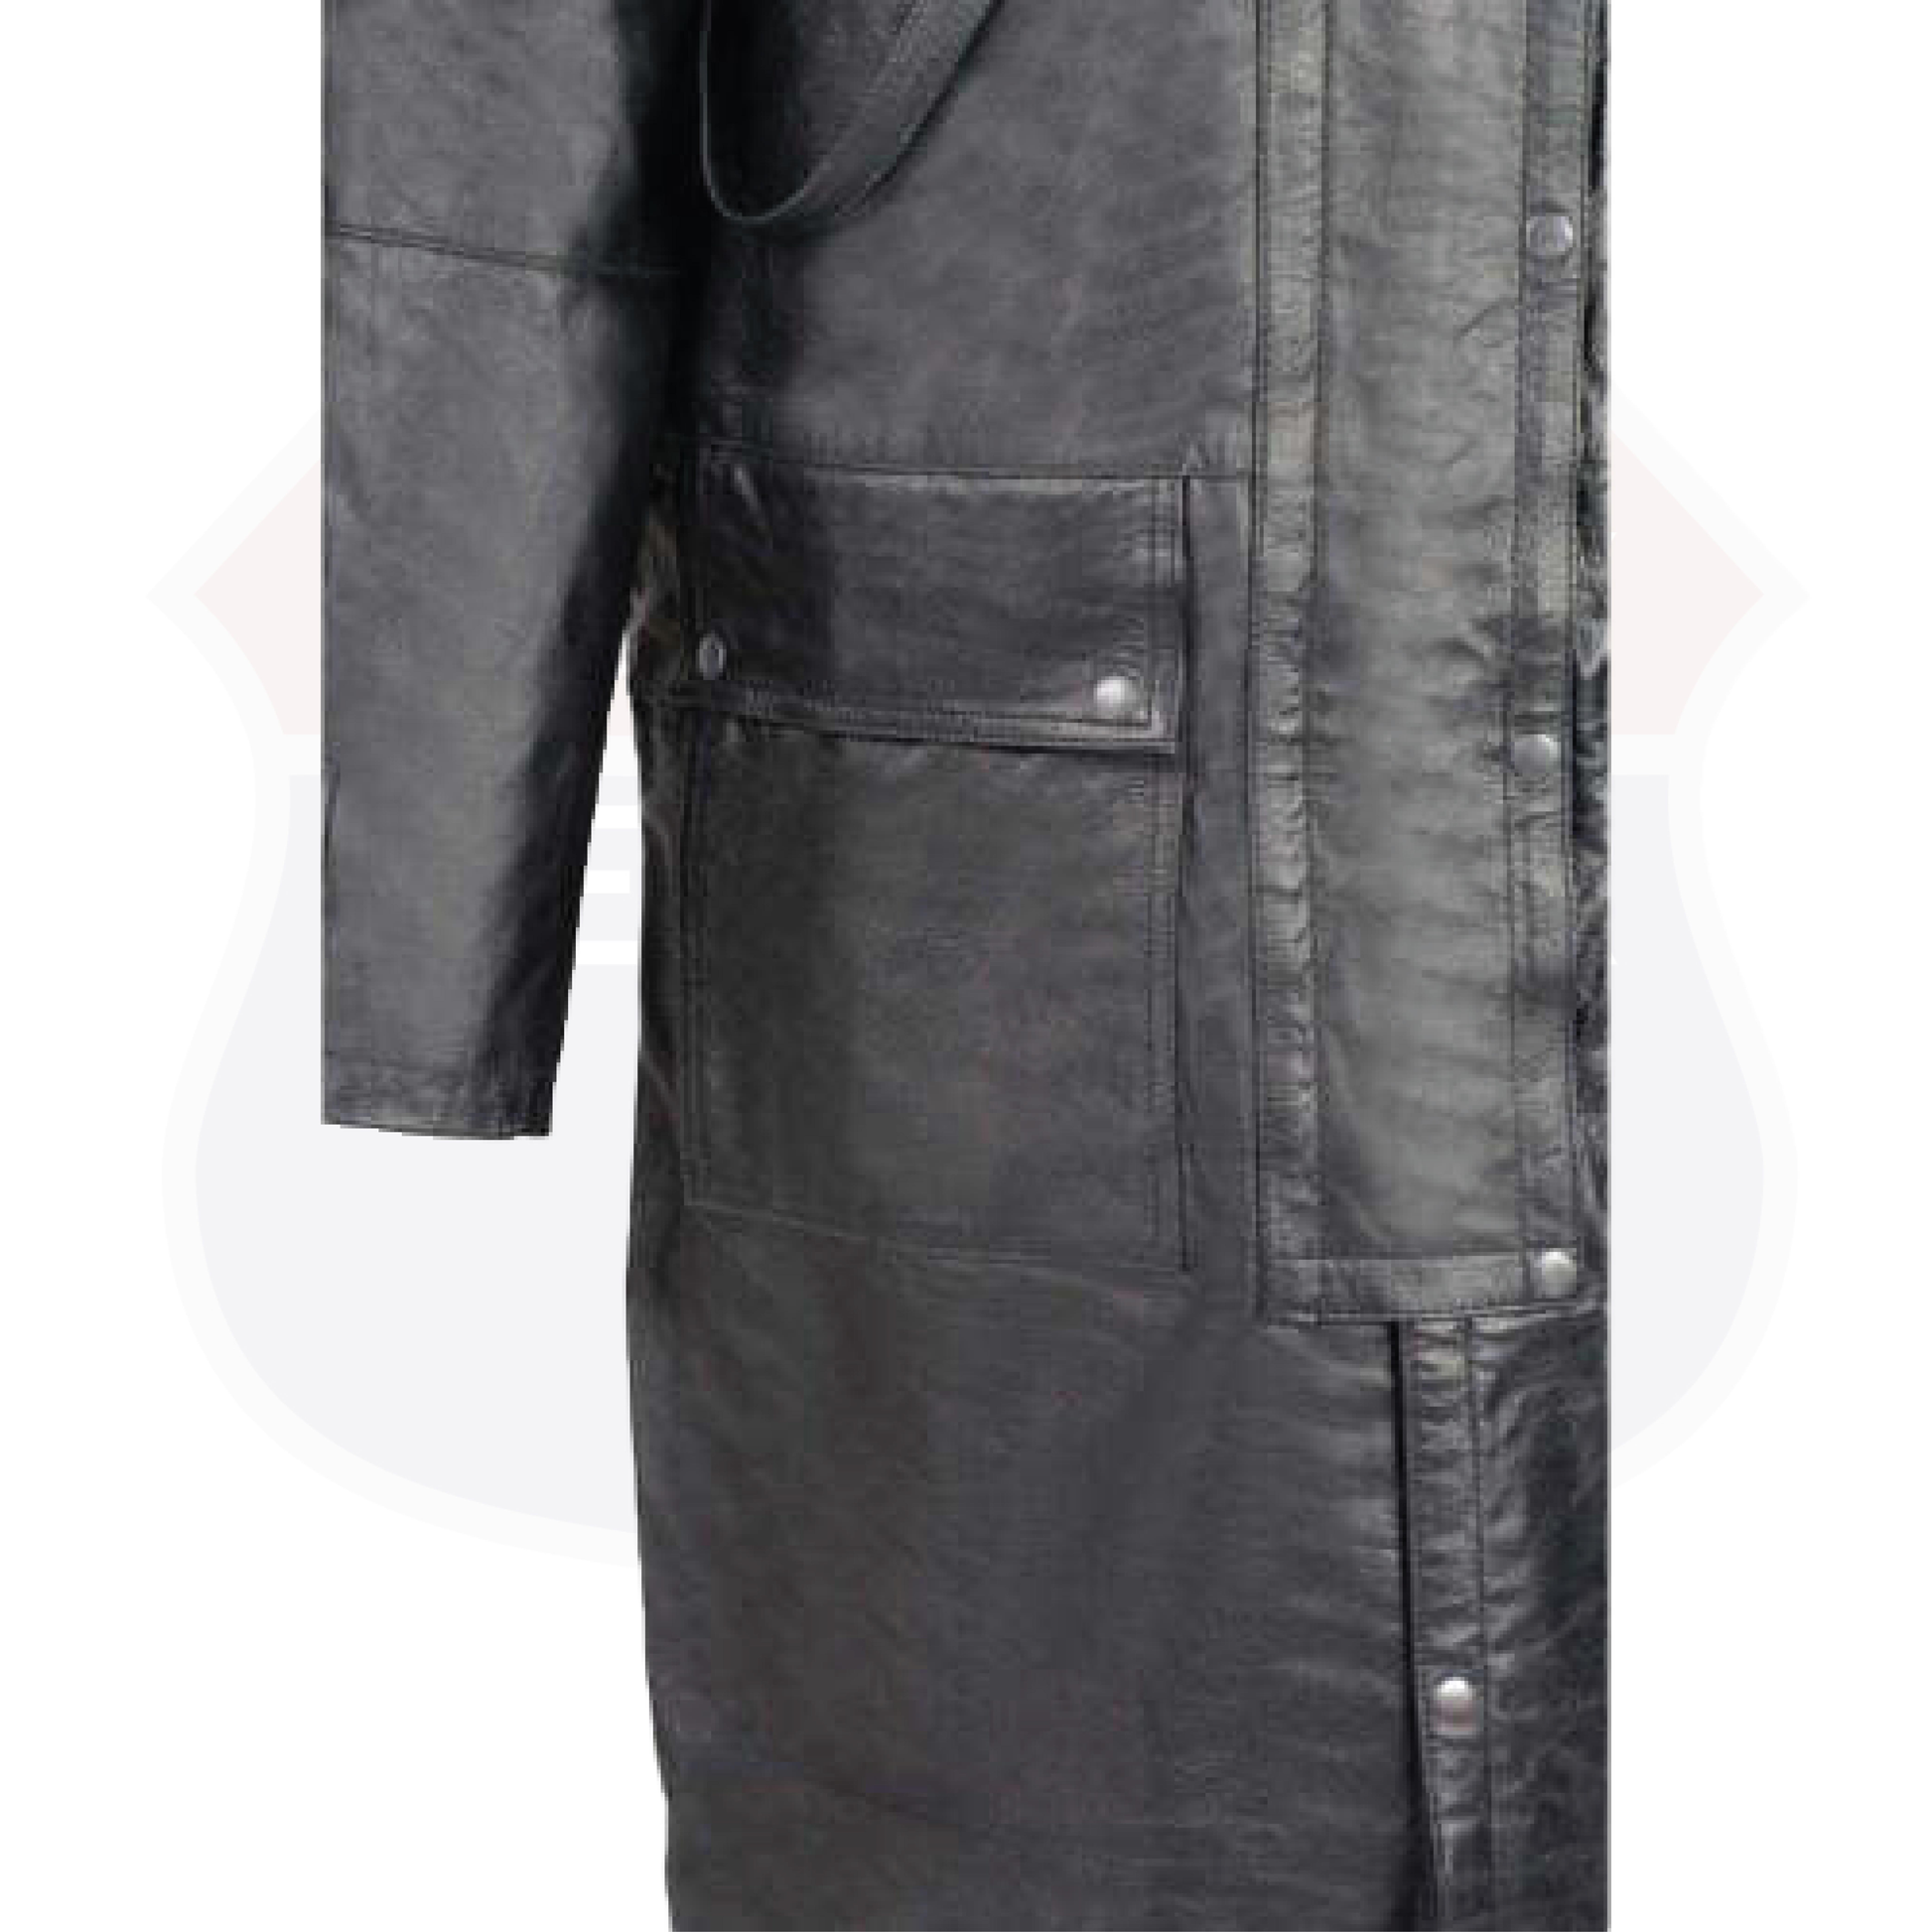 Leather Duster w/ Removable Cape & Leg Straps, Full Length SH910 - HighwayLeather